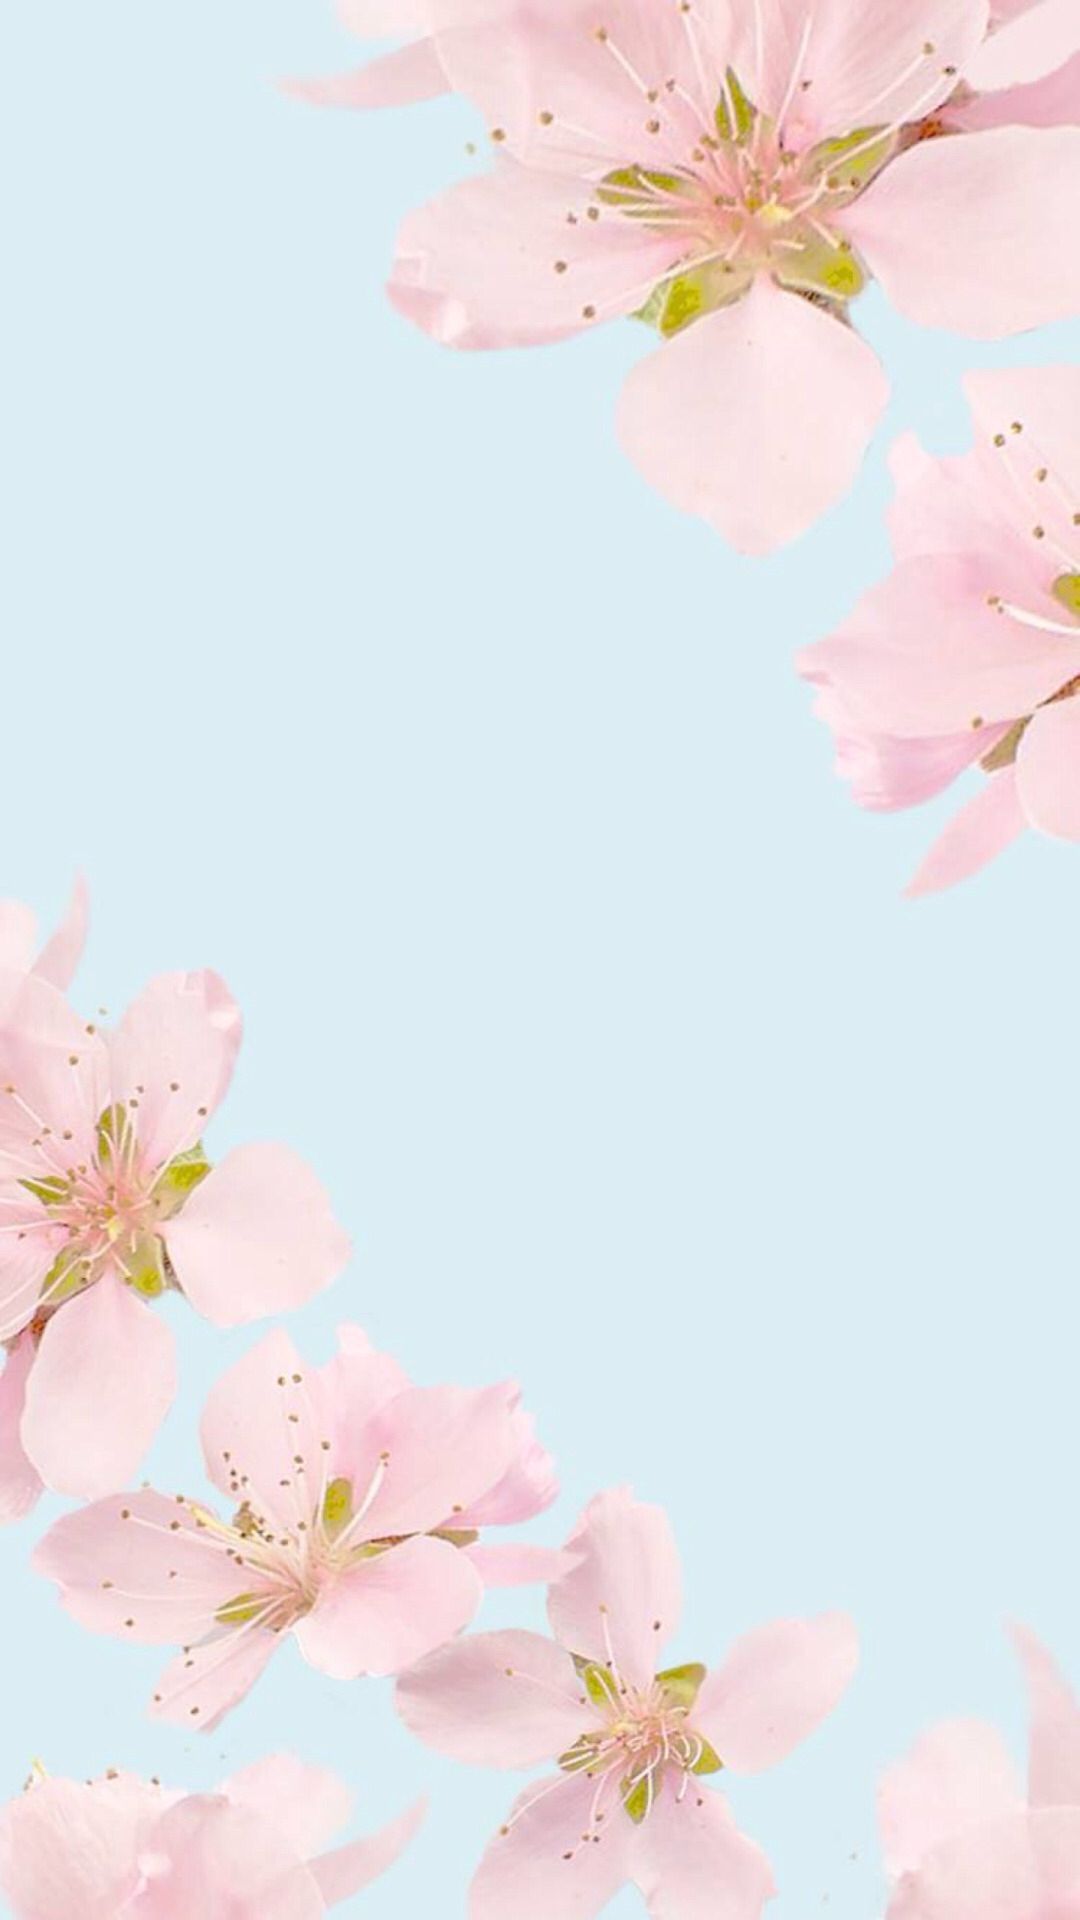 A pink flower background with white petals - Clean